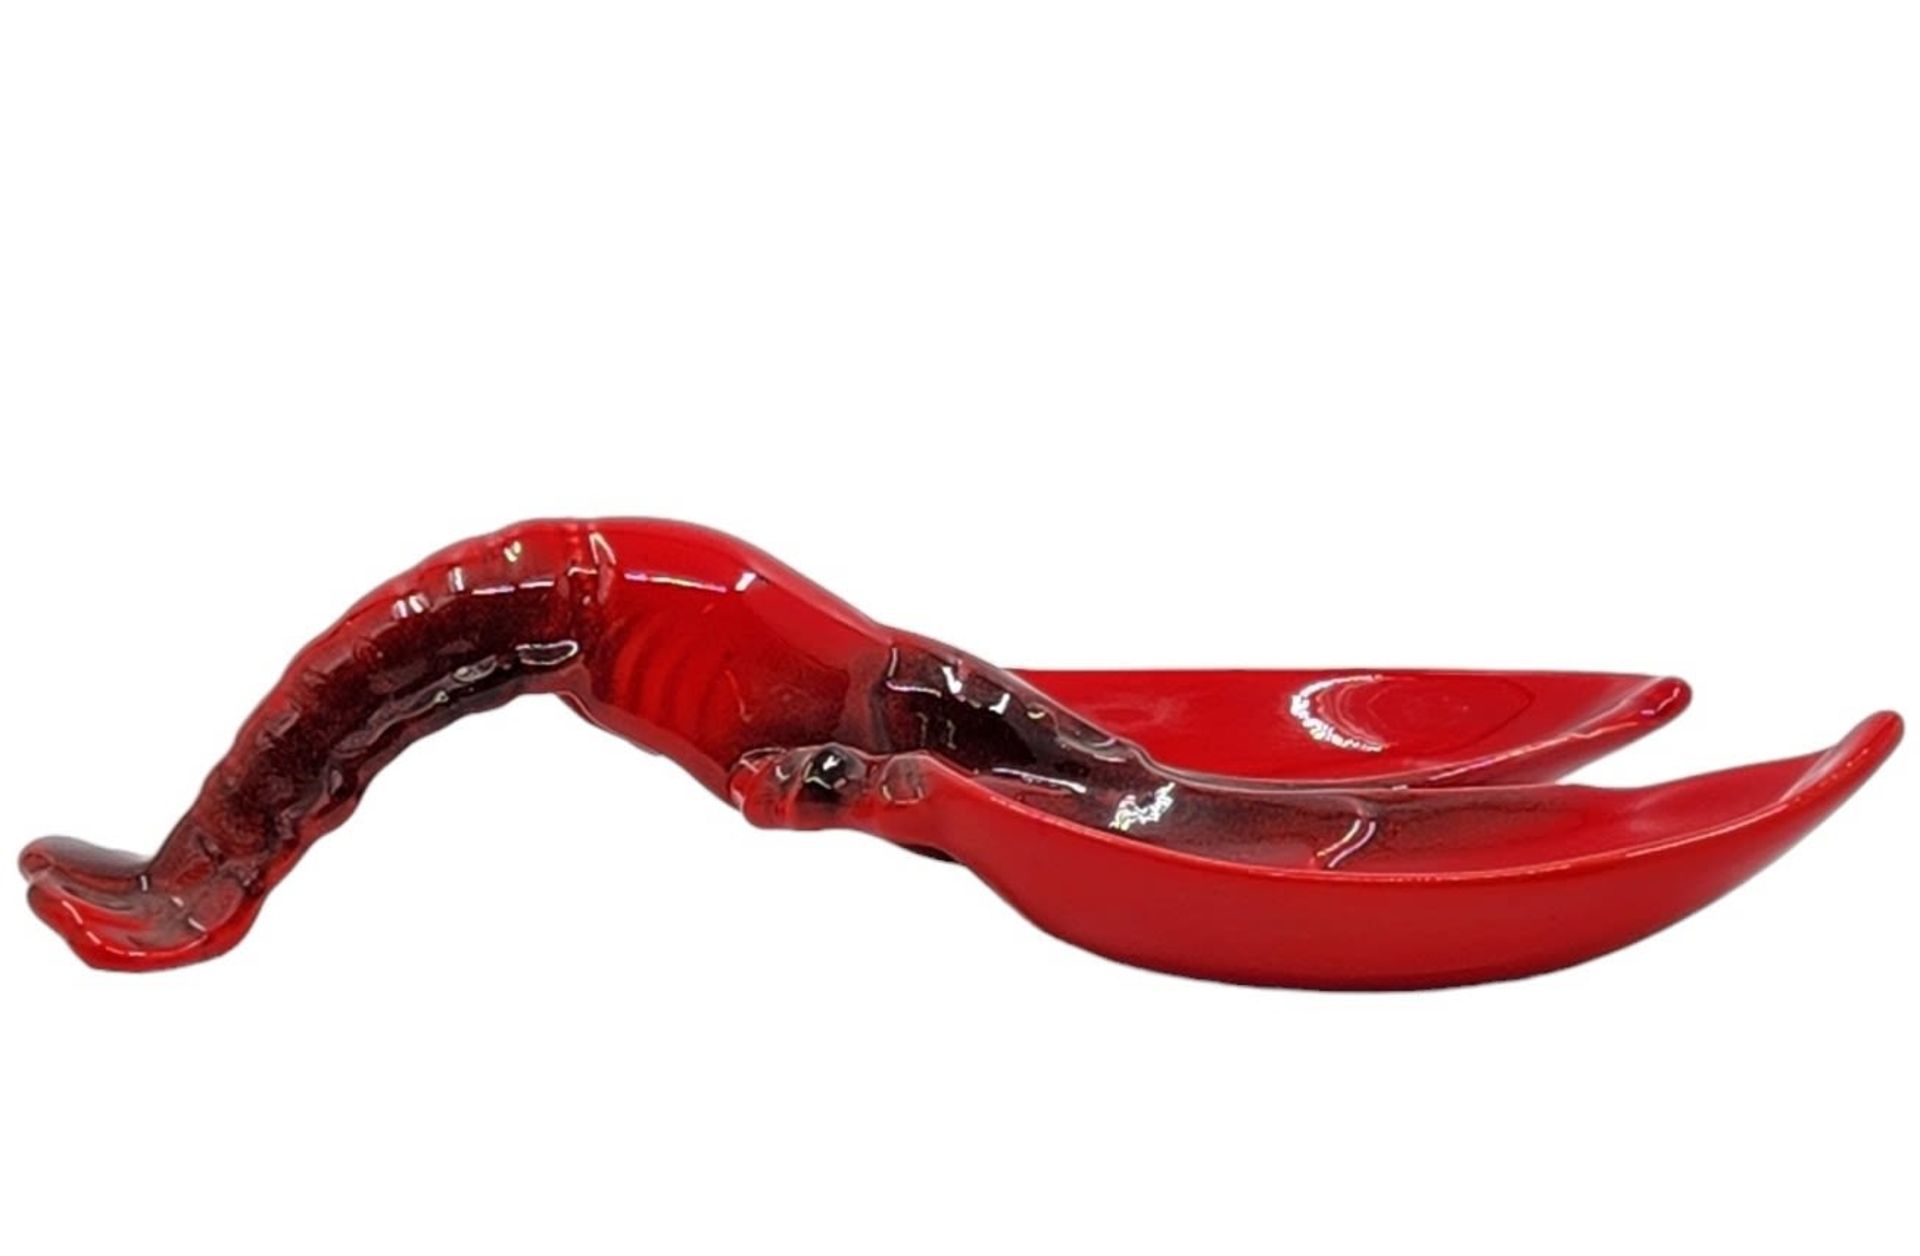 Two-compartment serving bowl, in the shape of a lobster, made of ceramic, decorated with a red tone. - Image 4 of 4